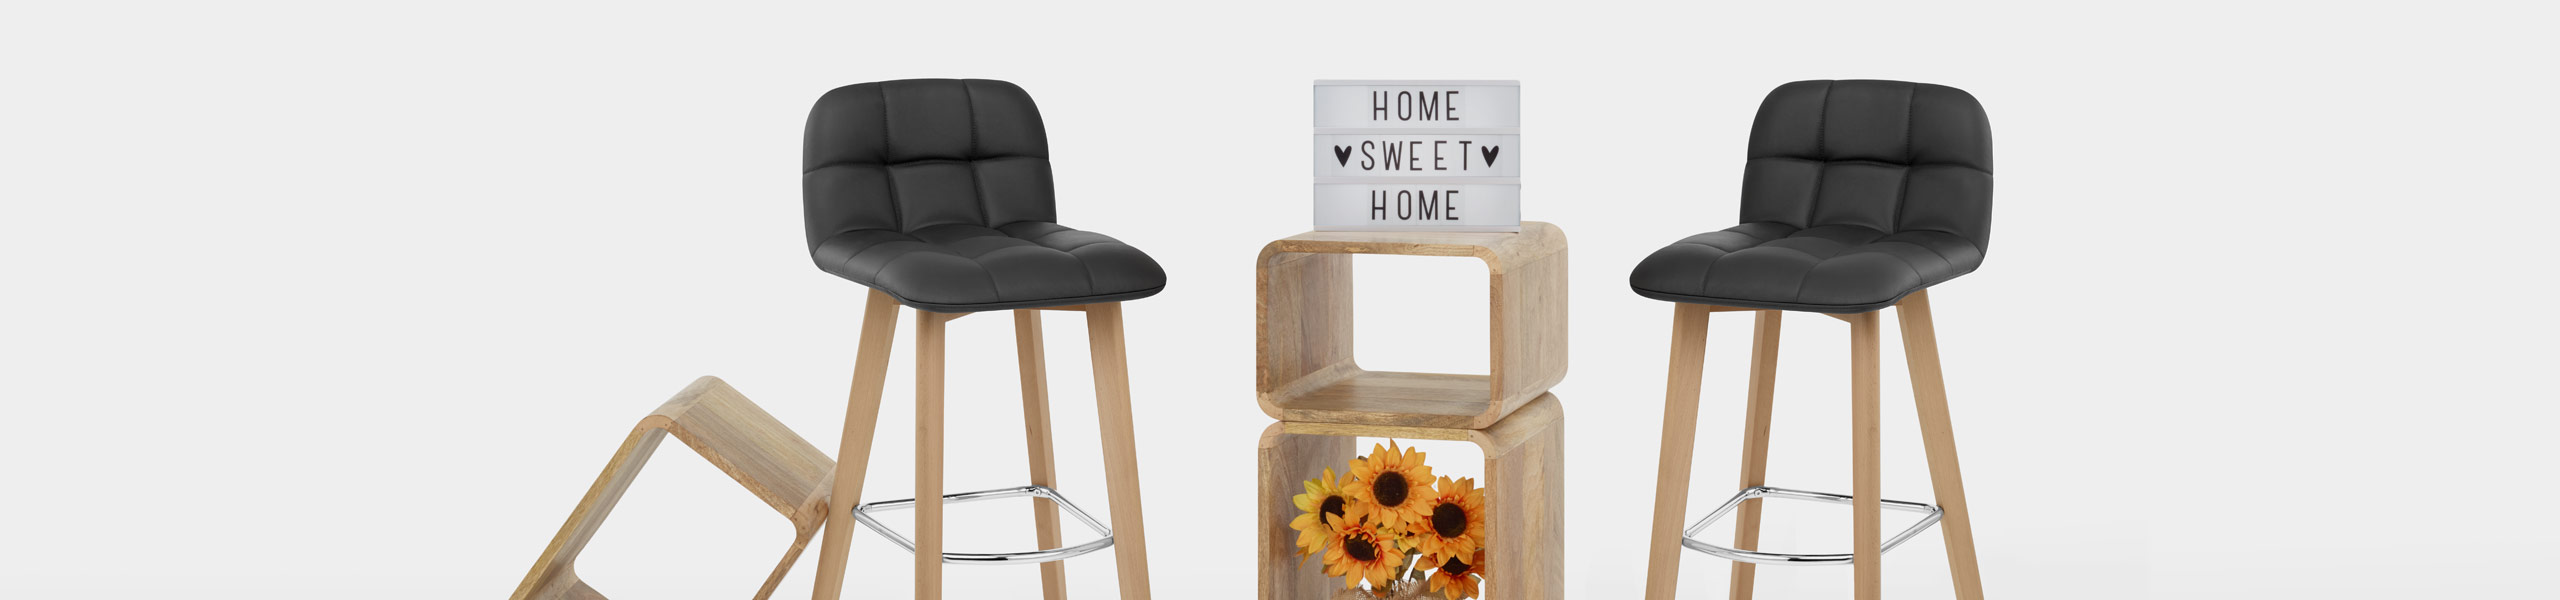 Hex Wooden Stool Black Real Leather Video Banner